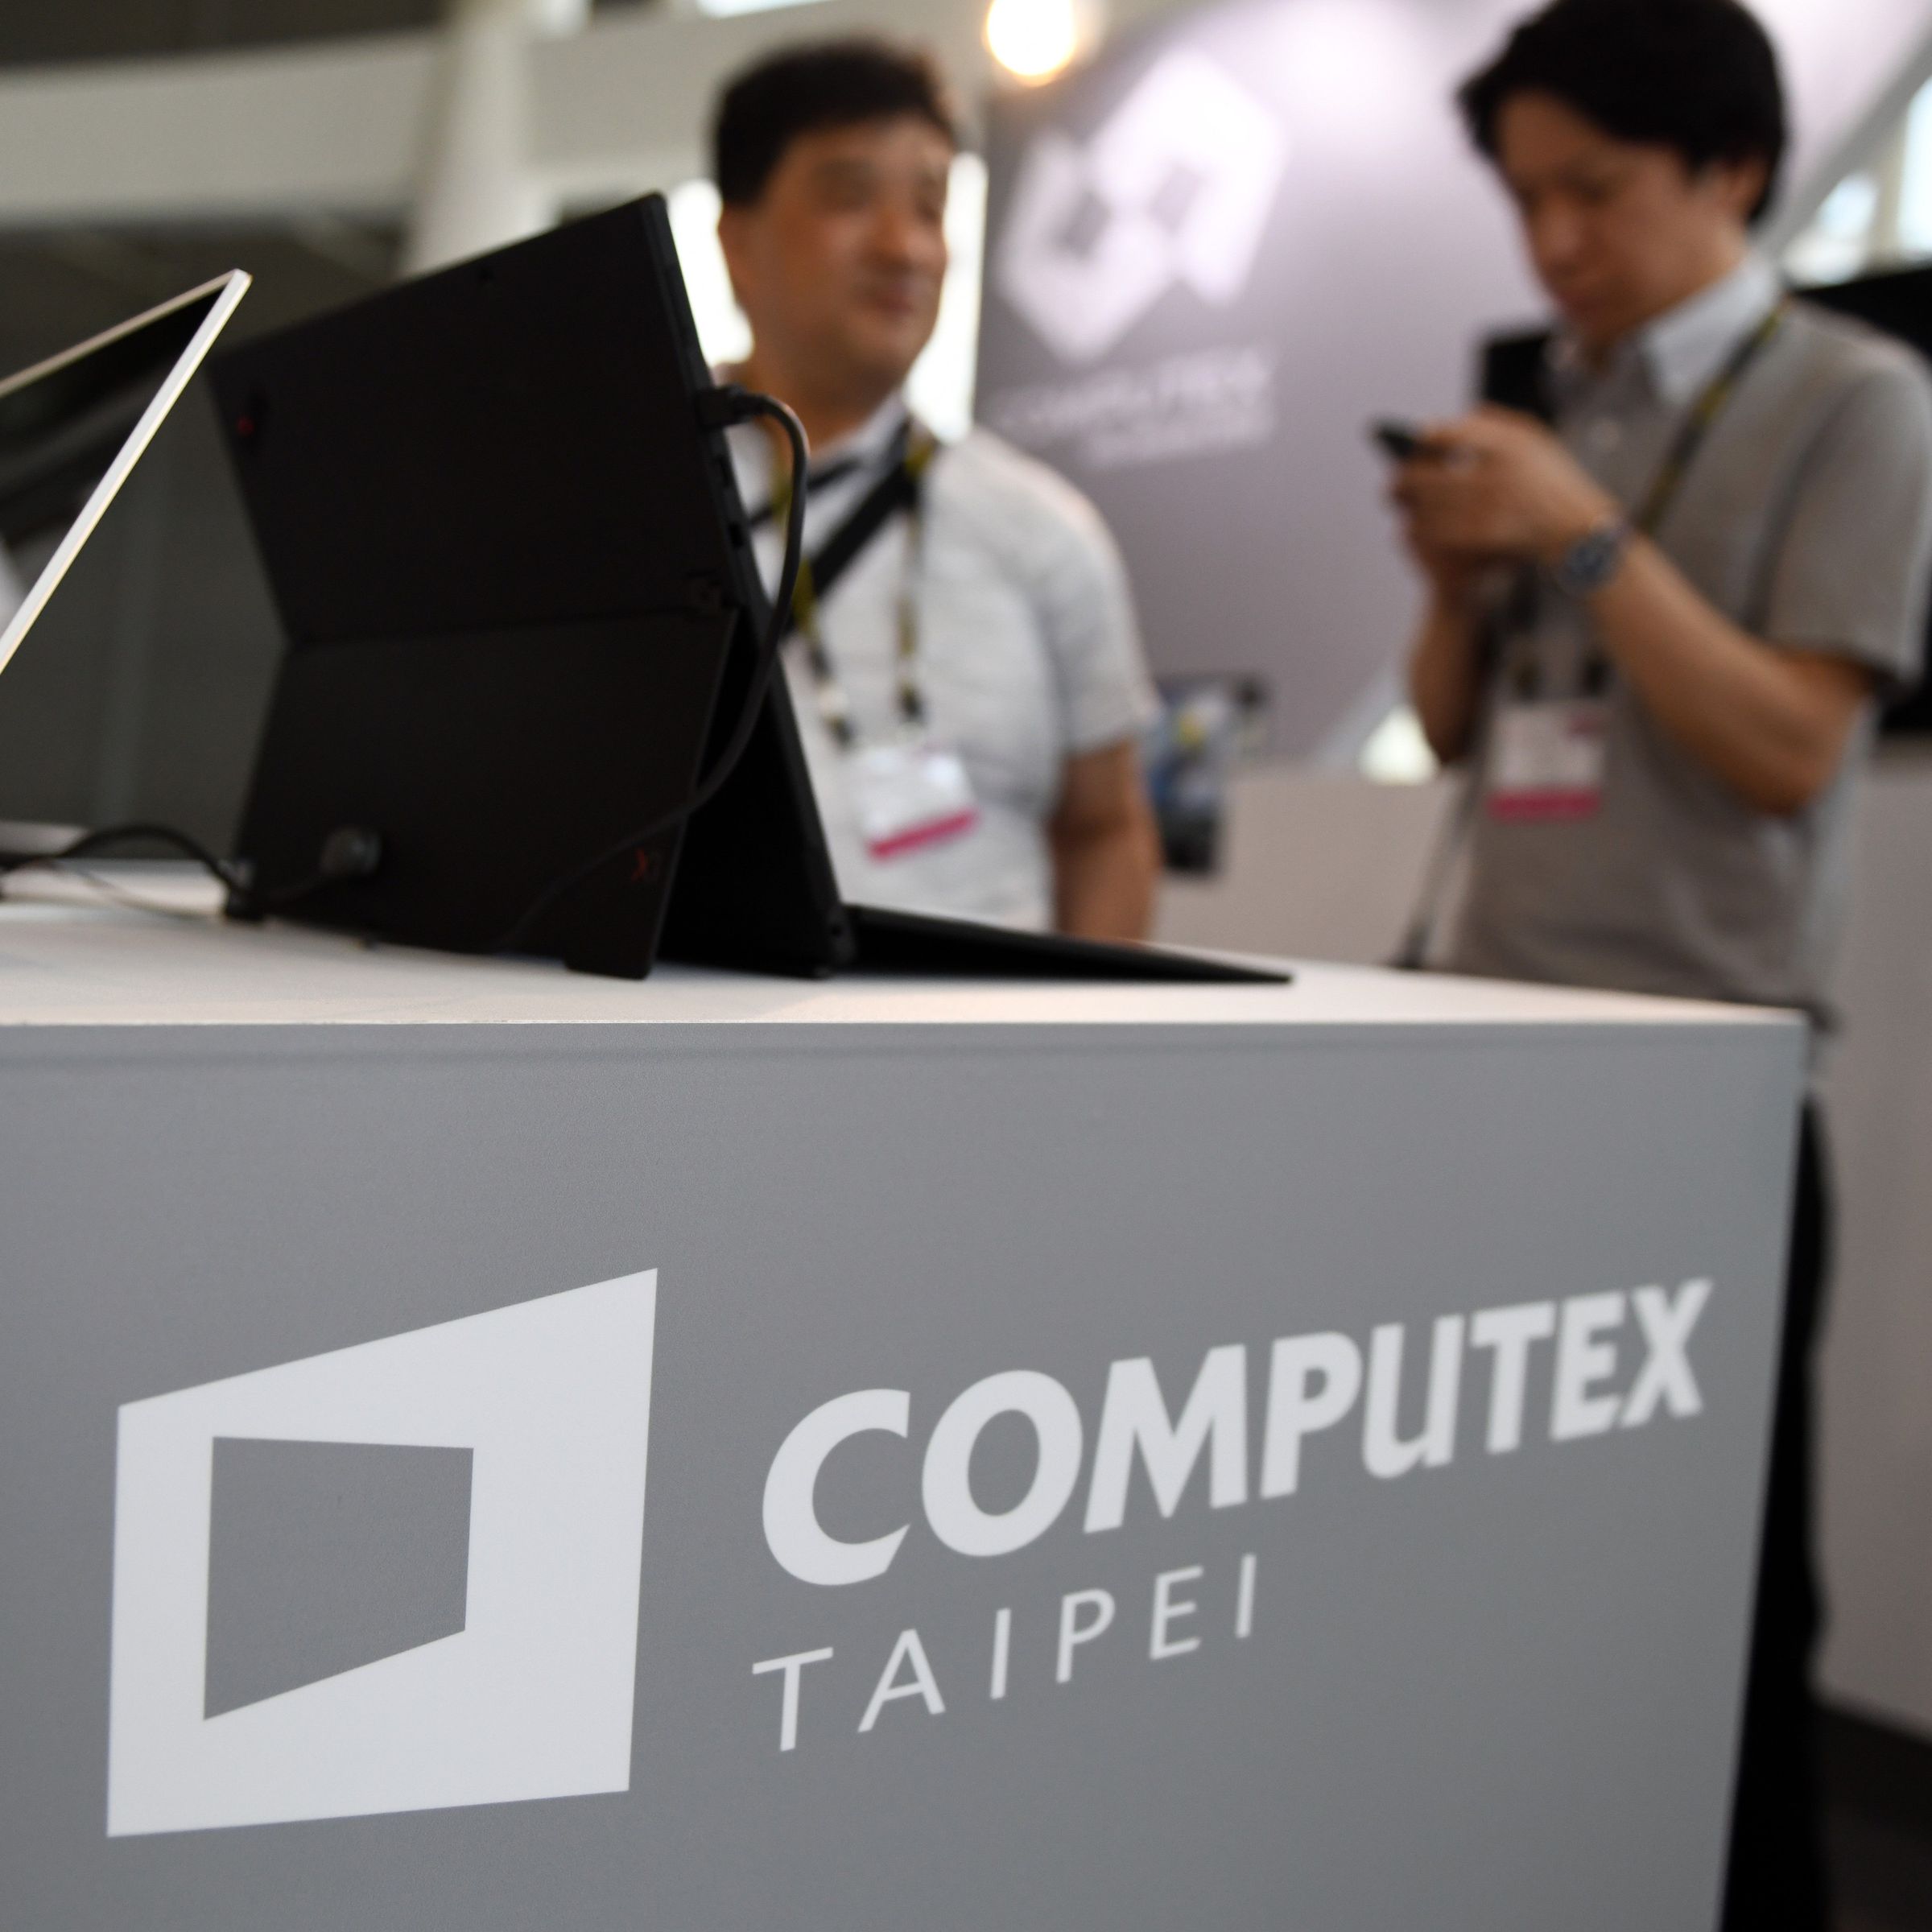 Two visitors stand behind a desk with Computex logo during Computex 2018 at the Nangang Exhibition Center in Taipei.